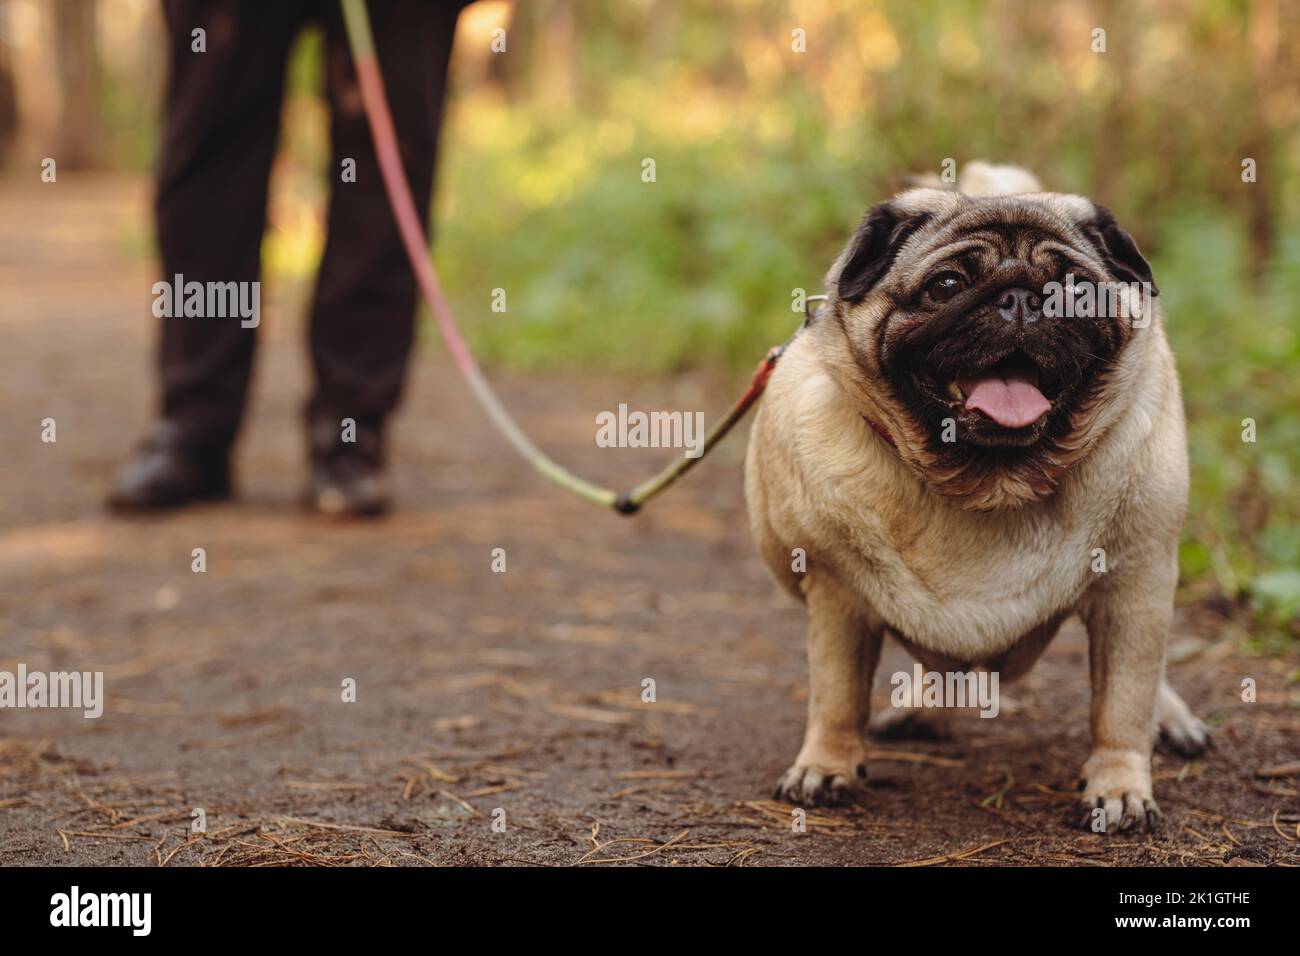 A pug dog on a leash with an open mouth and a protruding tongue on a walk with the owner Stock Photo